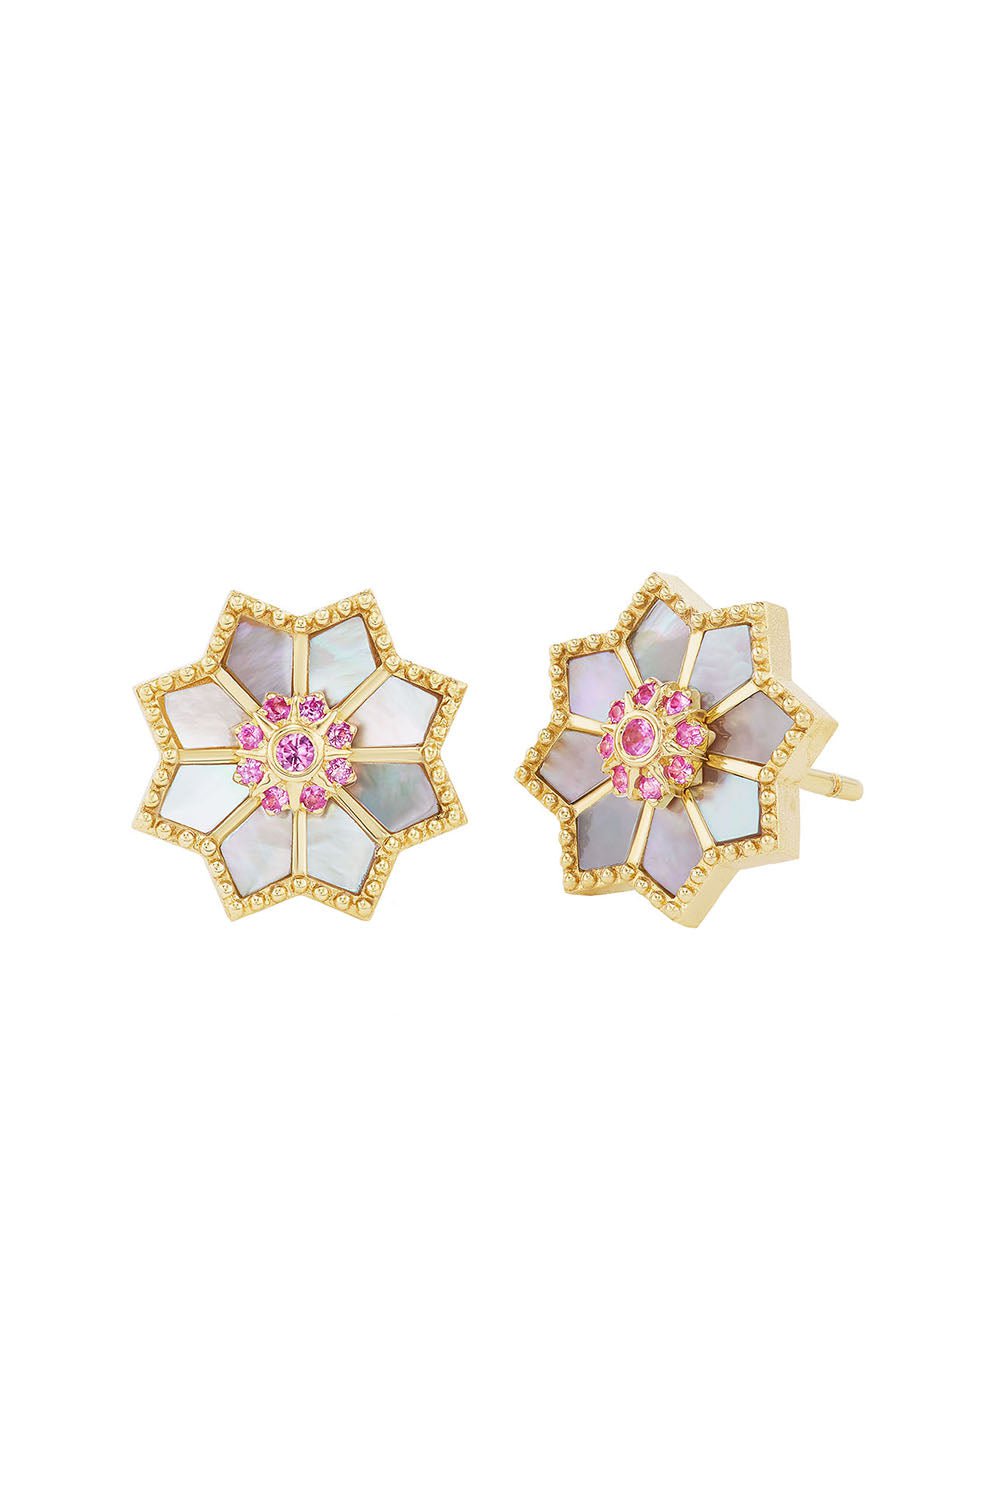 ORLY MARCEL-FEZ PEARL STUD EARRINGS-YELLOW GOLD